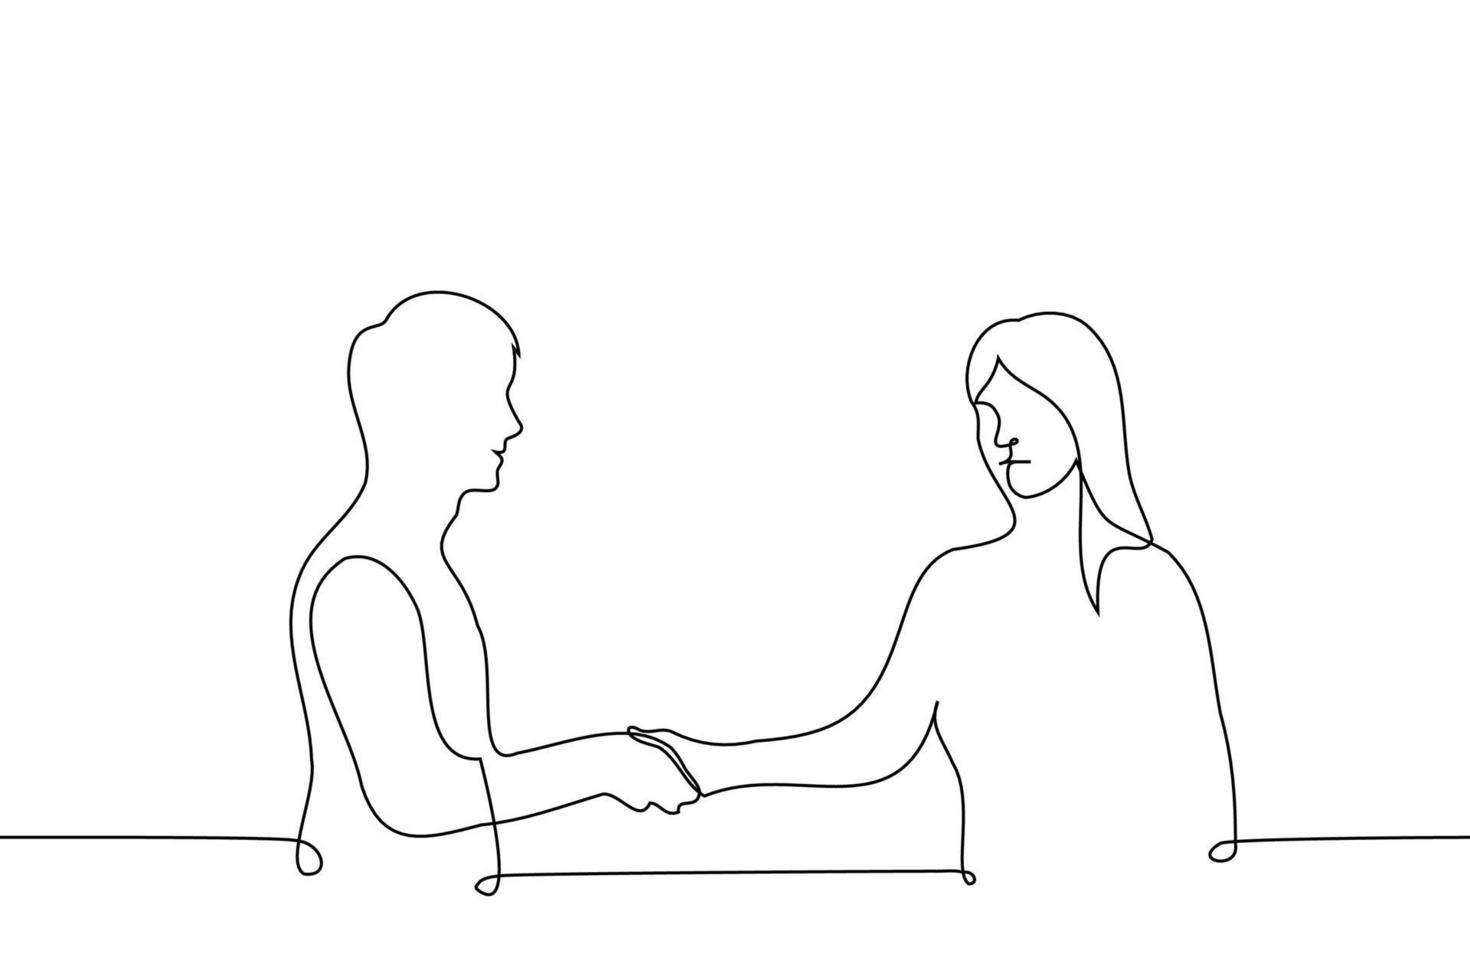 man smiles and shakes hands with a woman who is displeased or unpleasant - one line drawing vector. concept unreciprocal feeling, feeling irritated or angry at someone vector